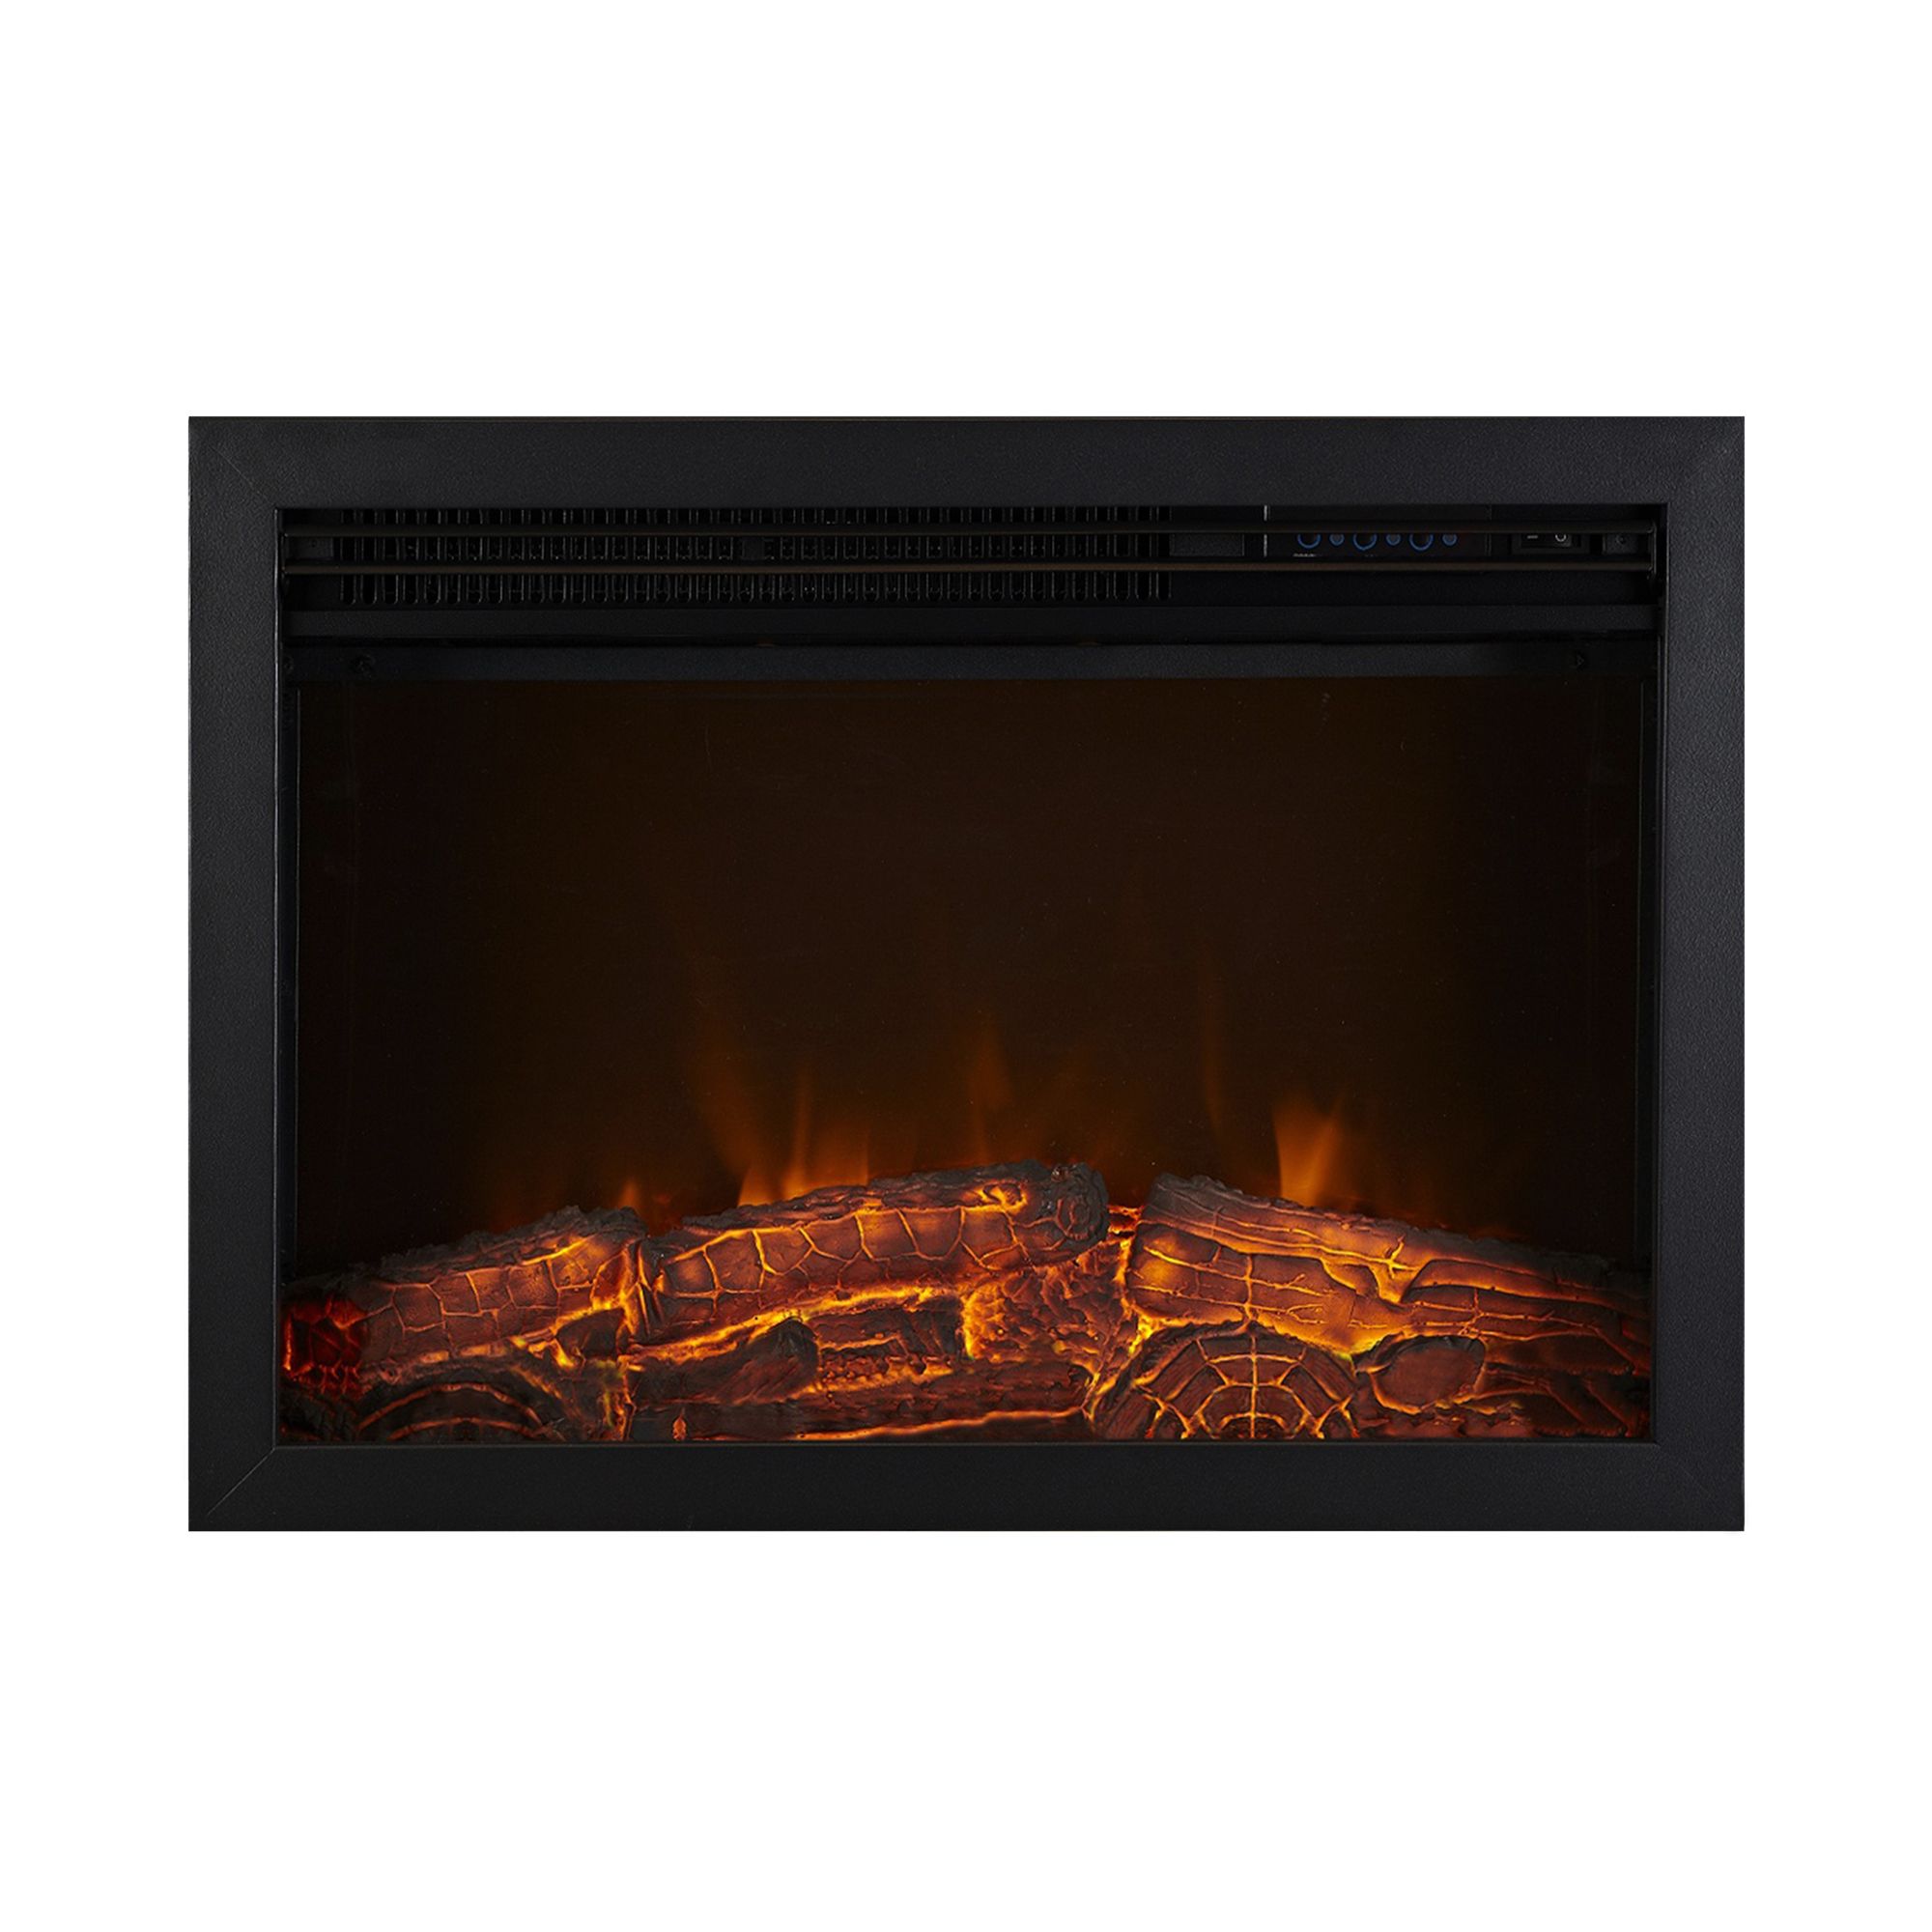 Focal Point Medford 1kW Black Electric Fire (H)445mm (W)605mm (D)205mm